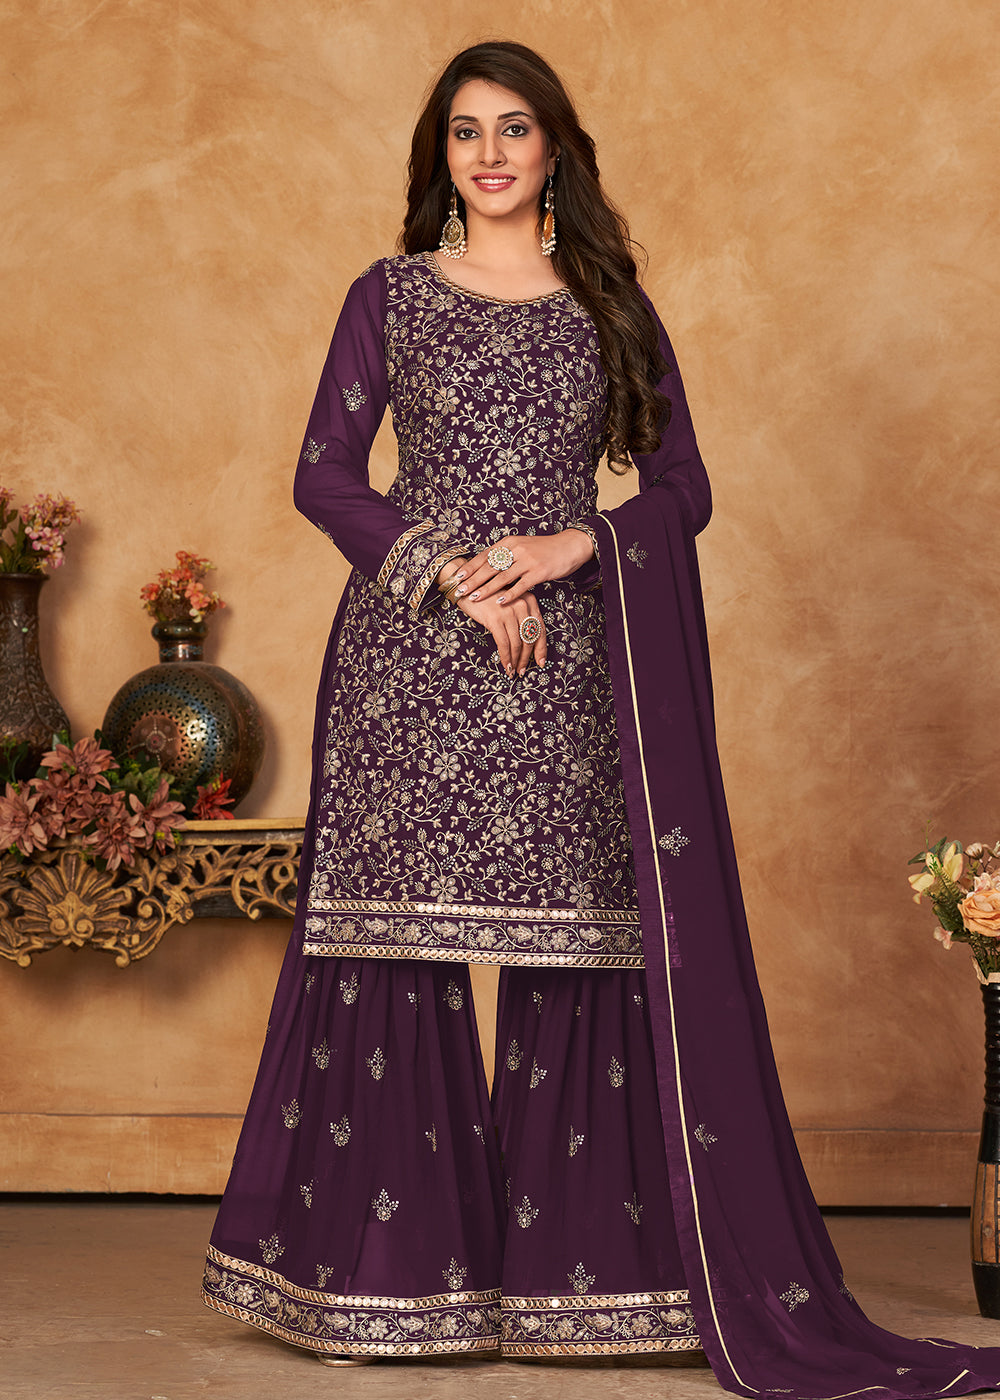 Shop Now Brilliant Plum Purple Embroidered Ceremonial Gharara Suit Online at Empress Clothing in USA, UK, Canada, Germany & Worldwide.